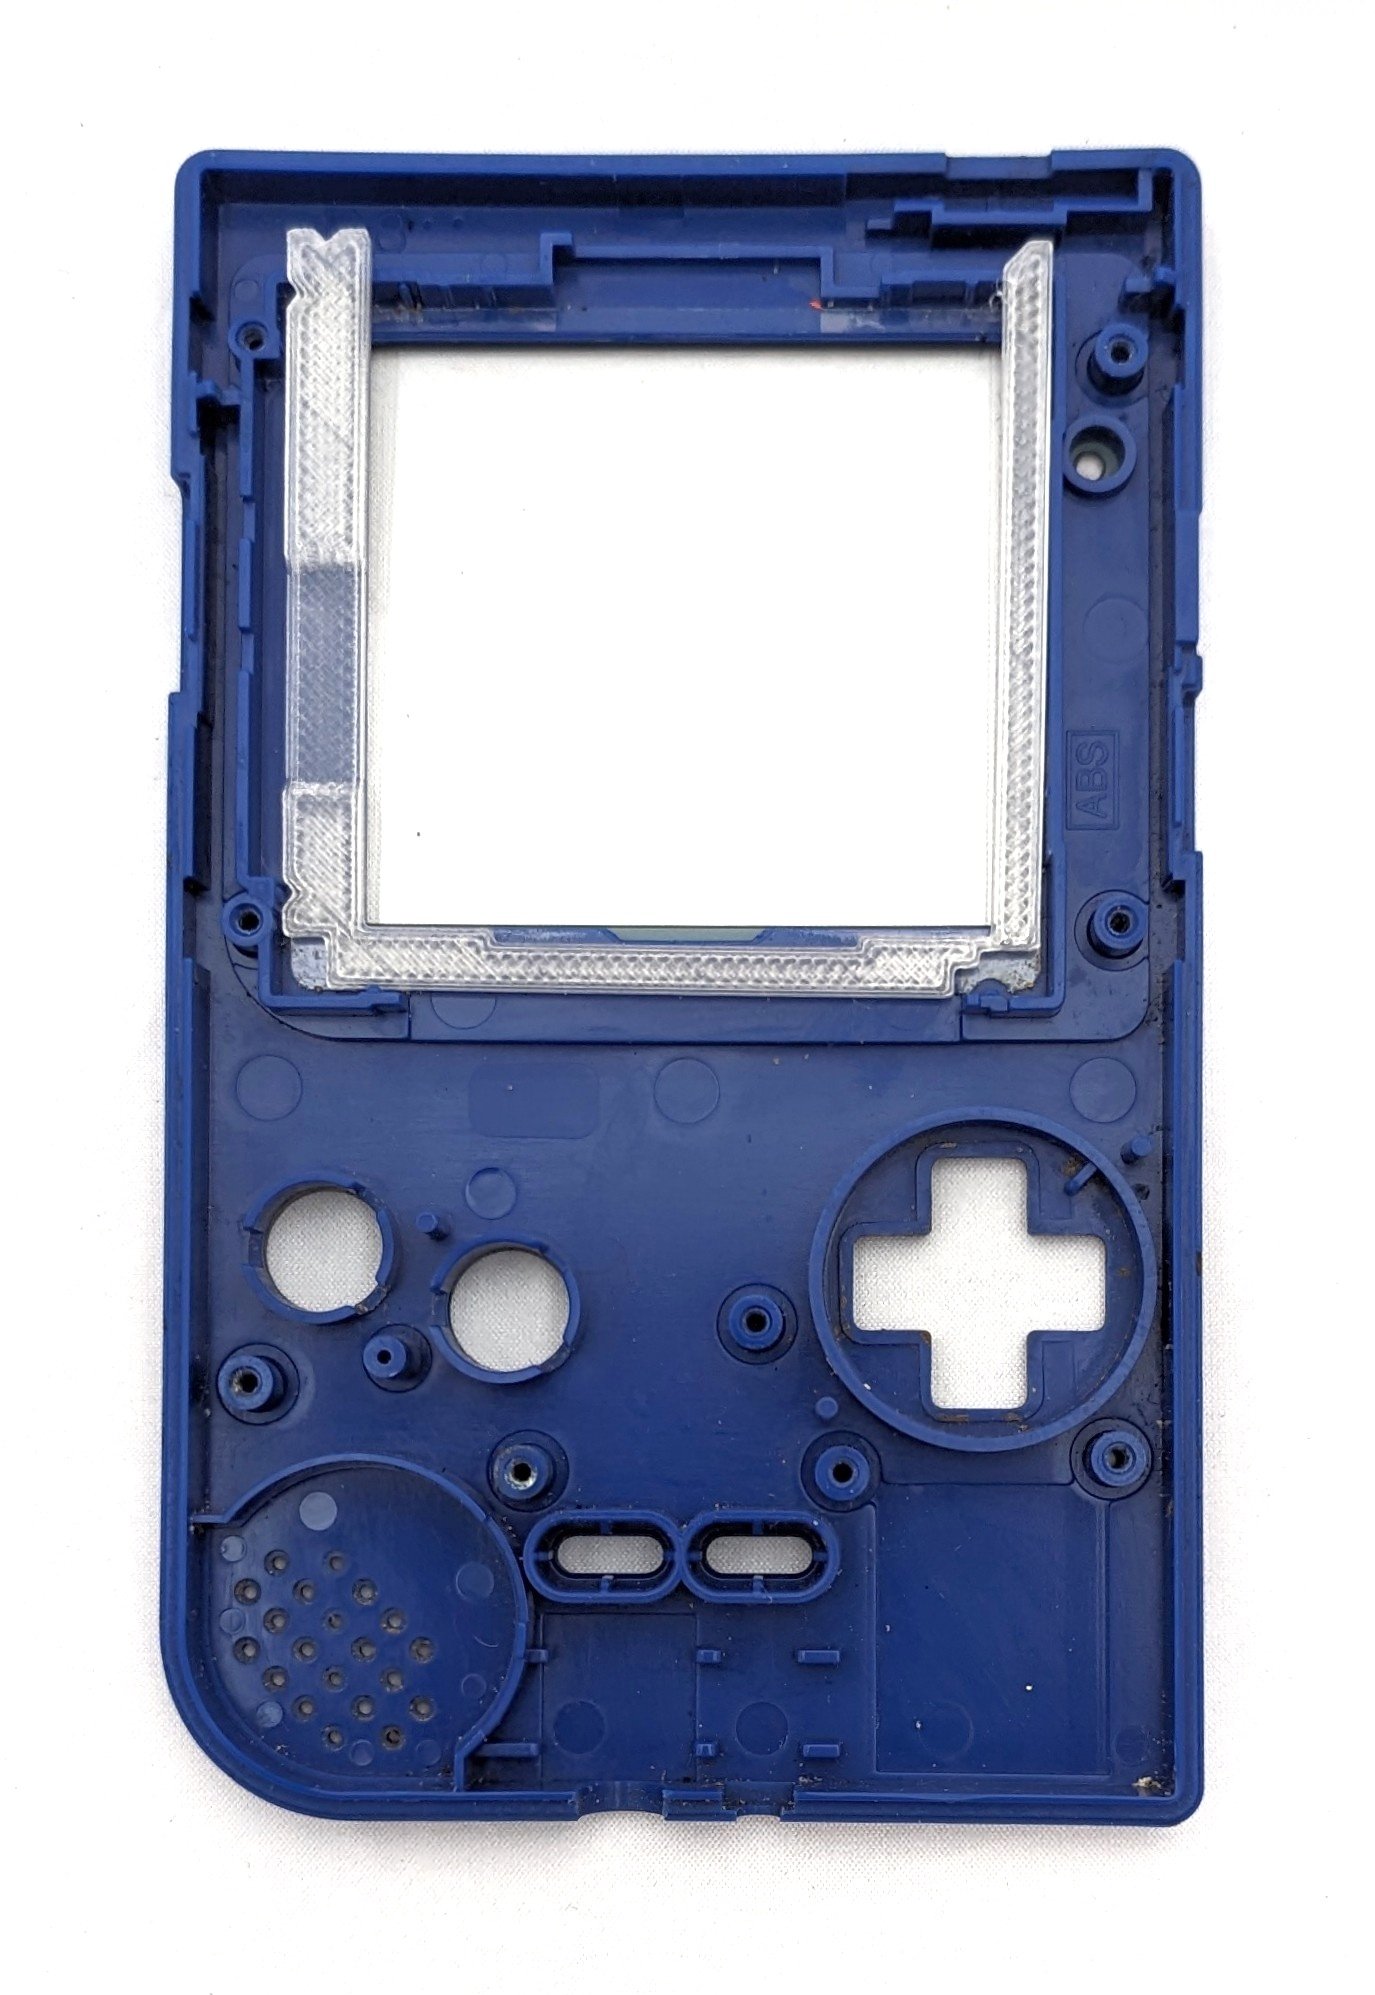 The inside of the front shell of the Game Boy